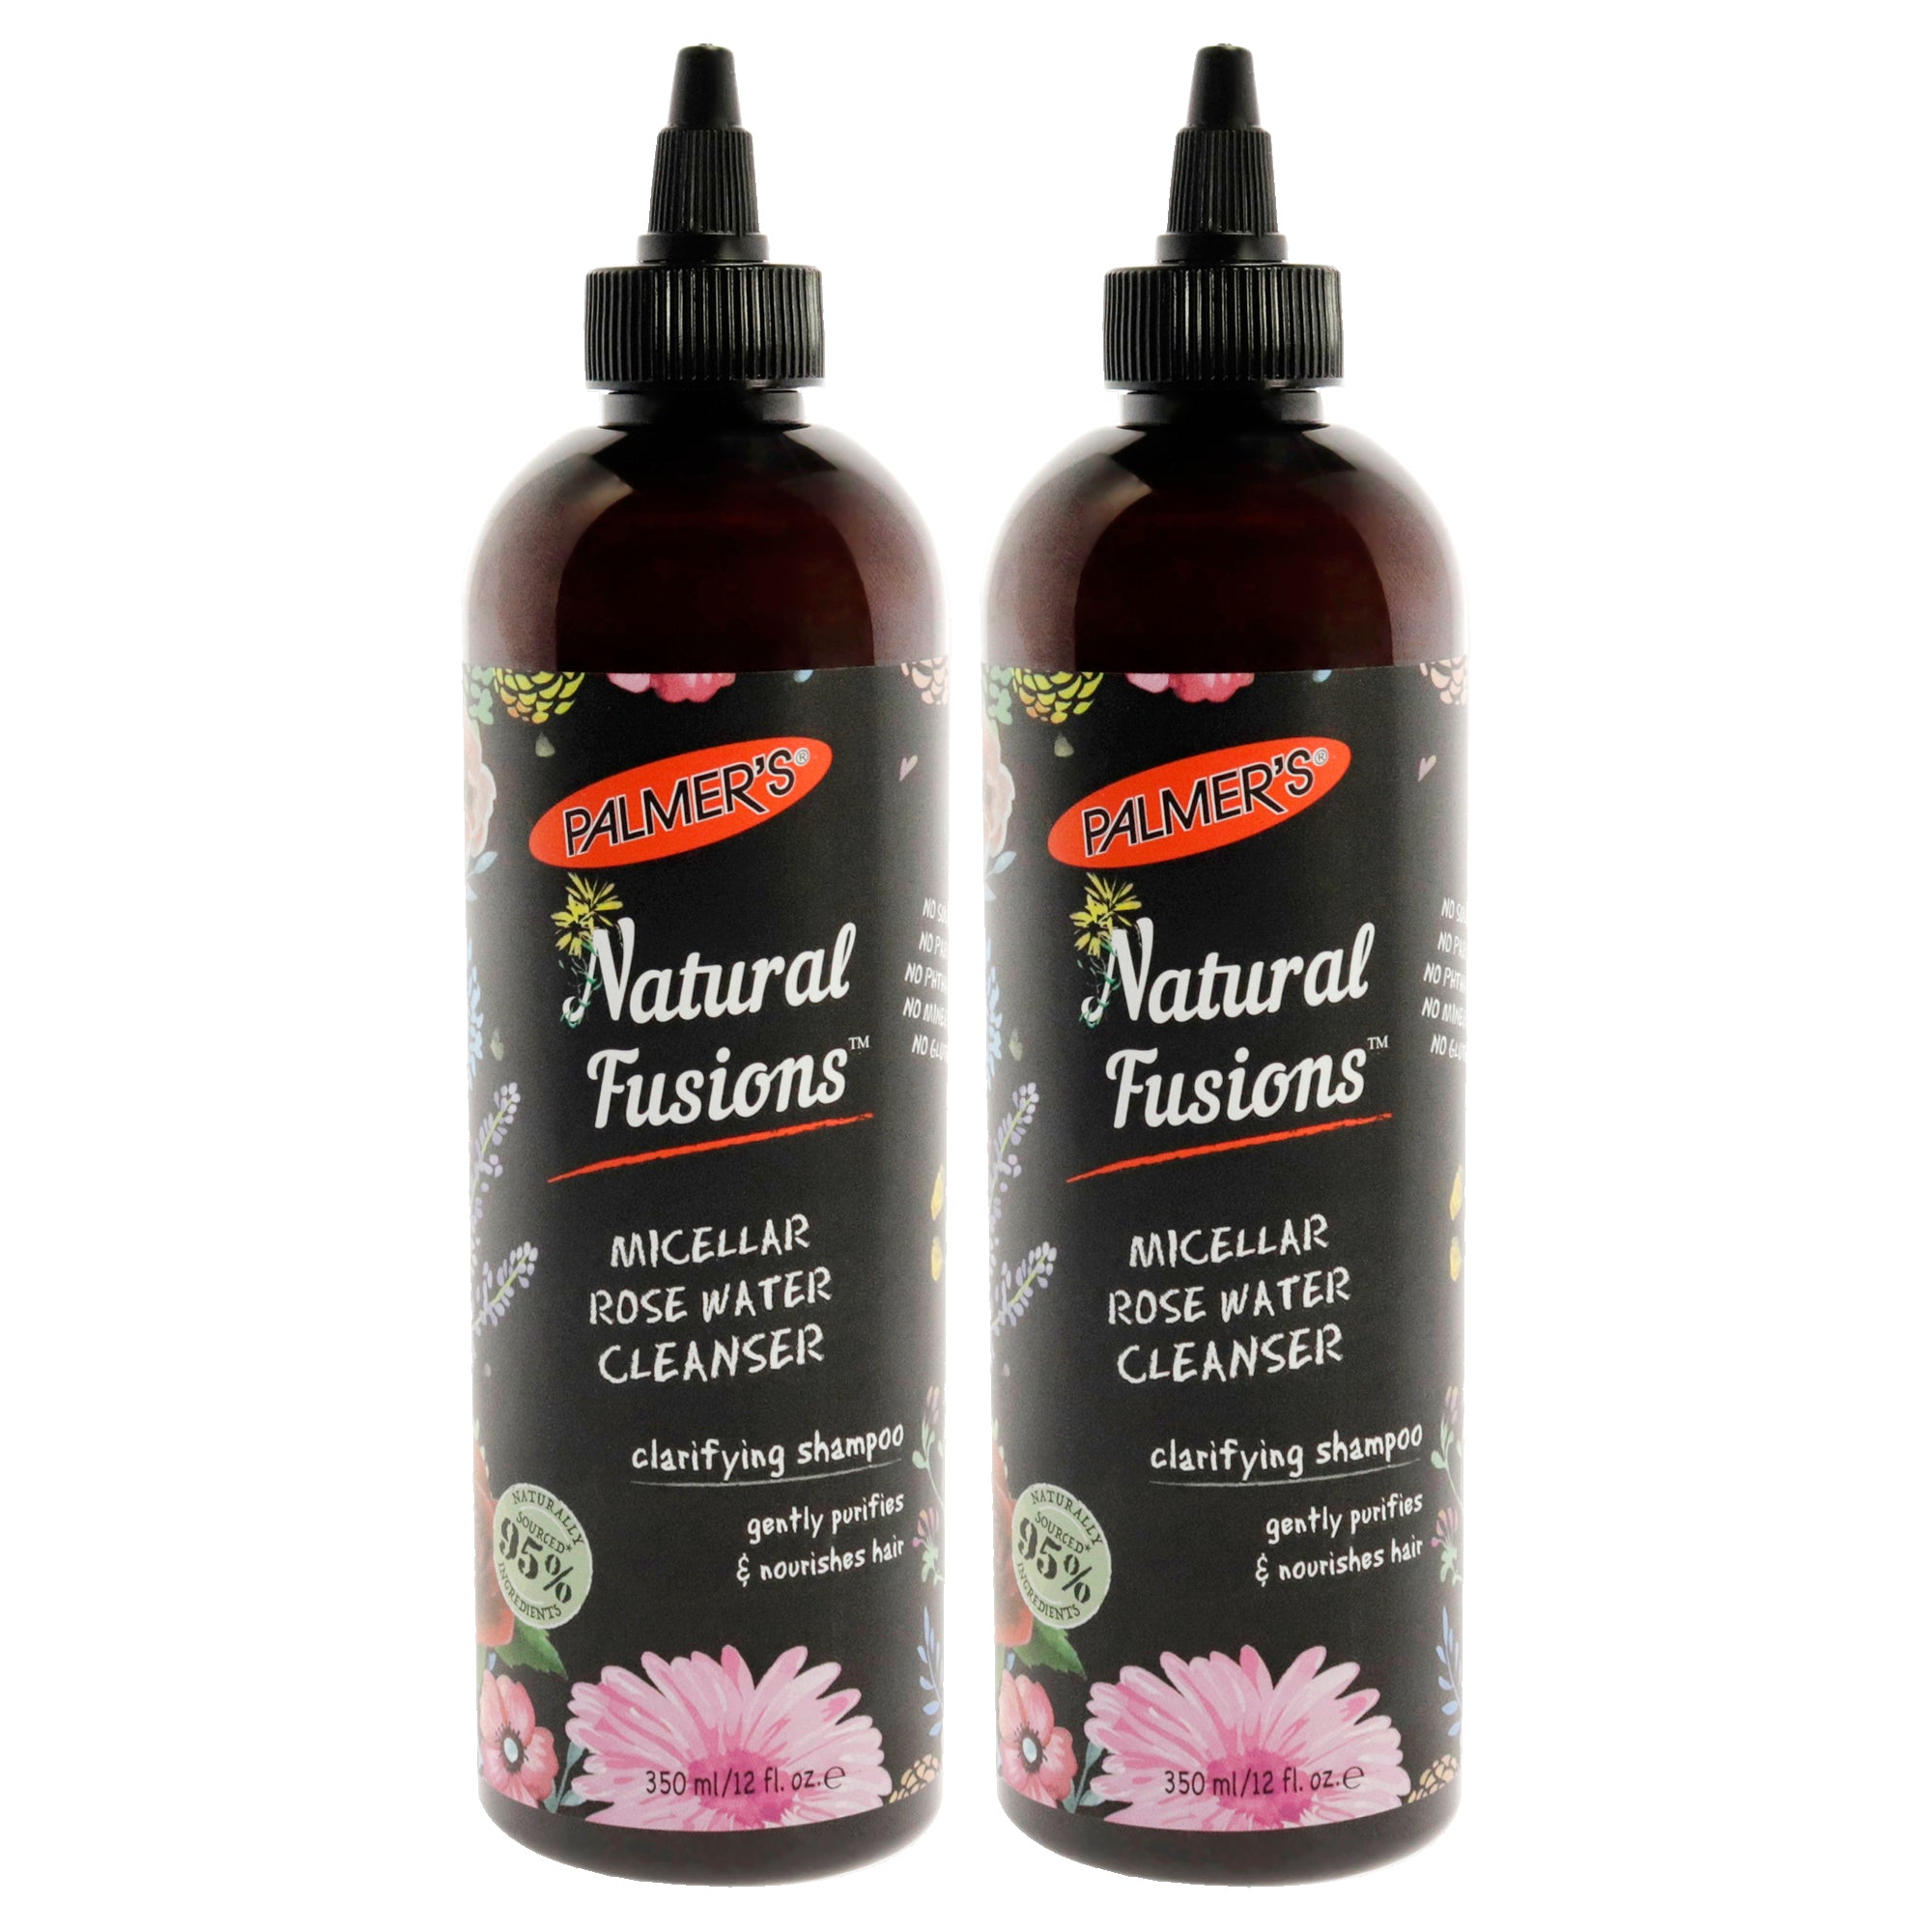 Natural Fusions Micellar Rose Water Cleanser Clarifying Shampoo - Pack of 2 by Palmers for Unisex - 12 oz Shampoo